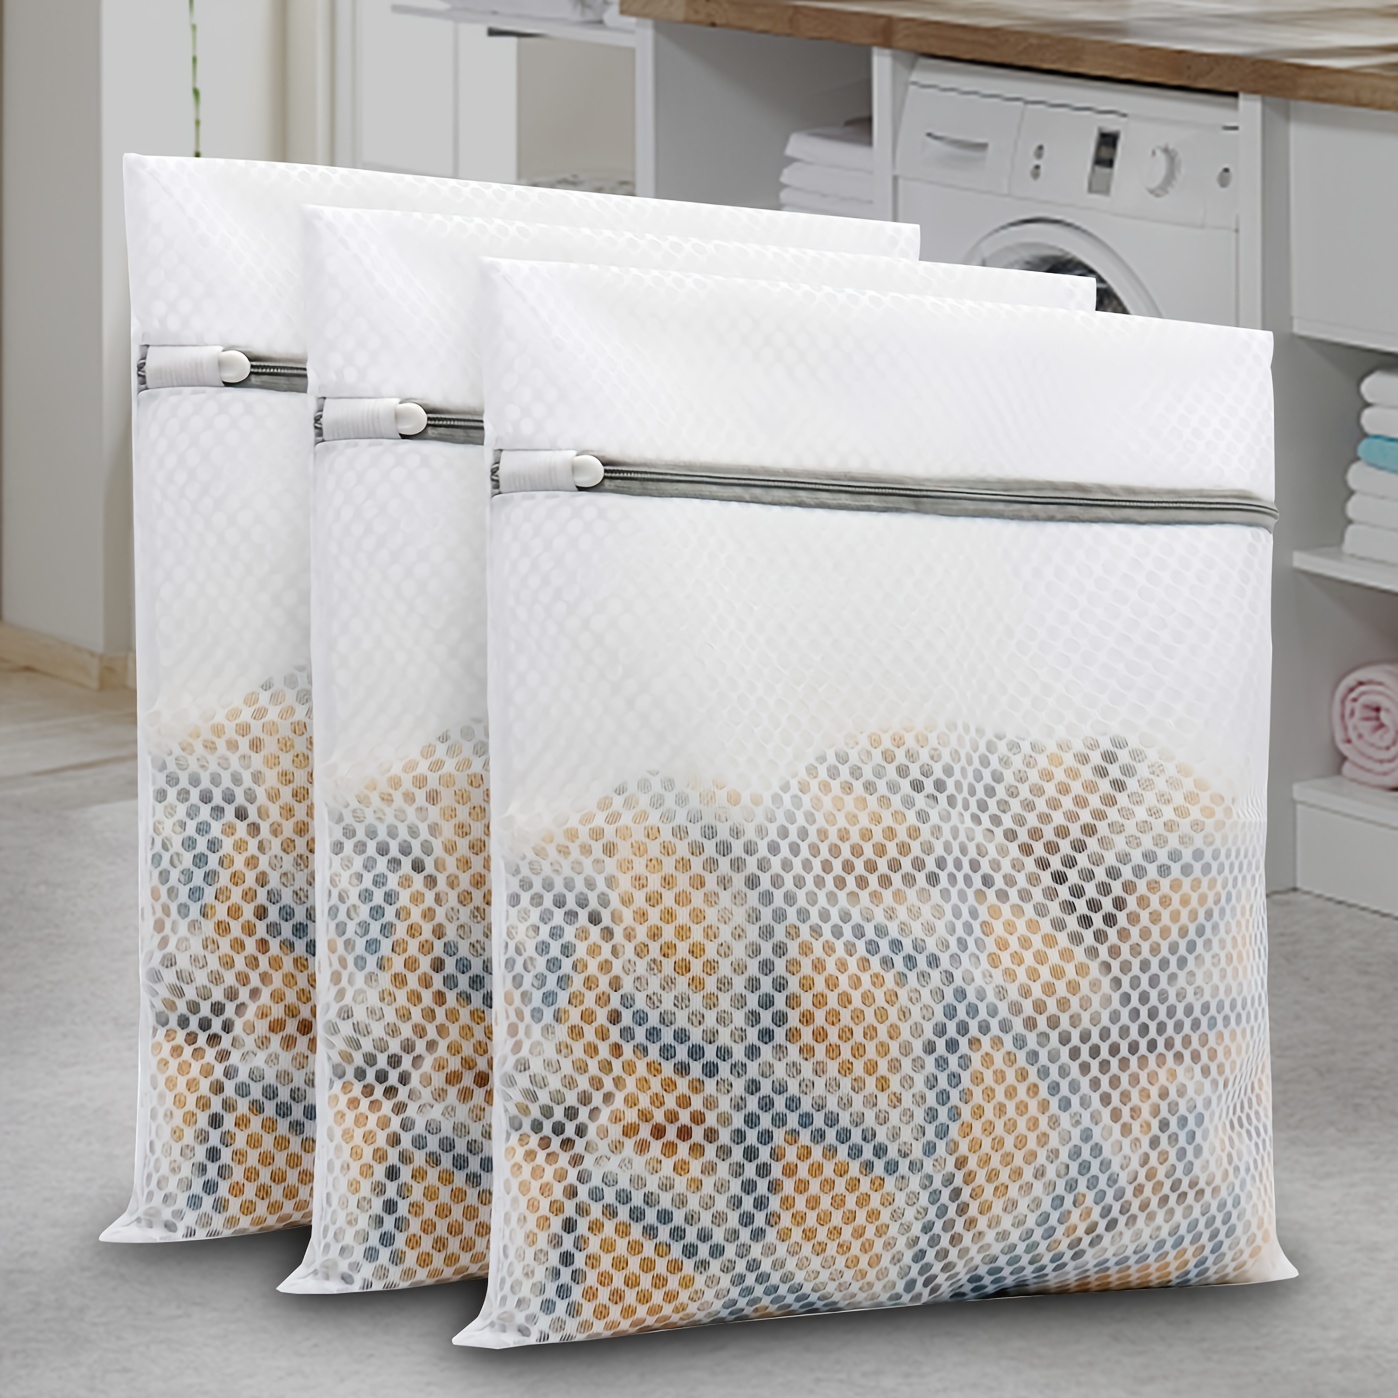  Lingerie Bags for Washing Delicates,Small Fine Mesh Laundry Bags,3Pcs(1  Large,1 Medium,1 Small) : Home & Kitchen